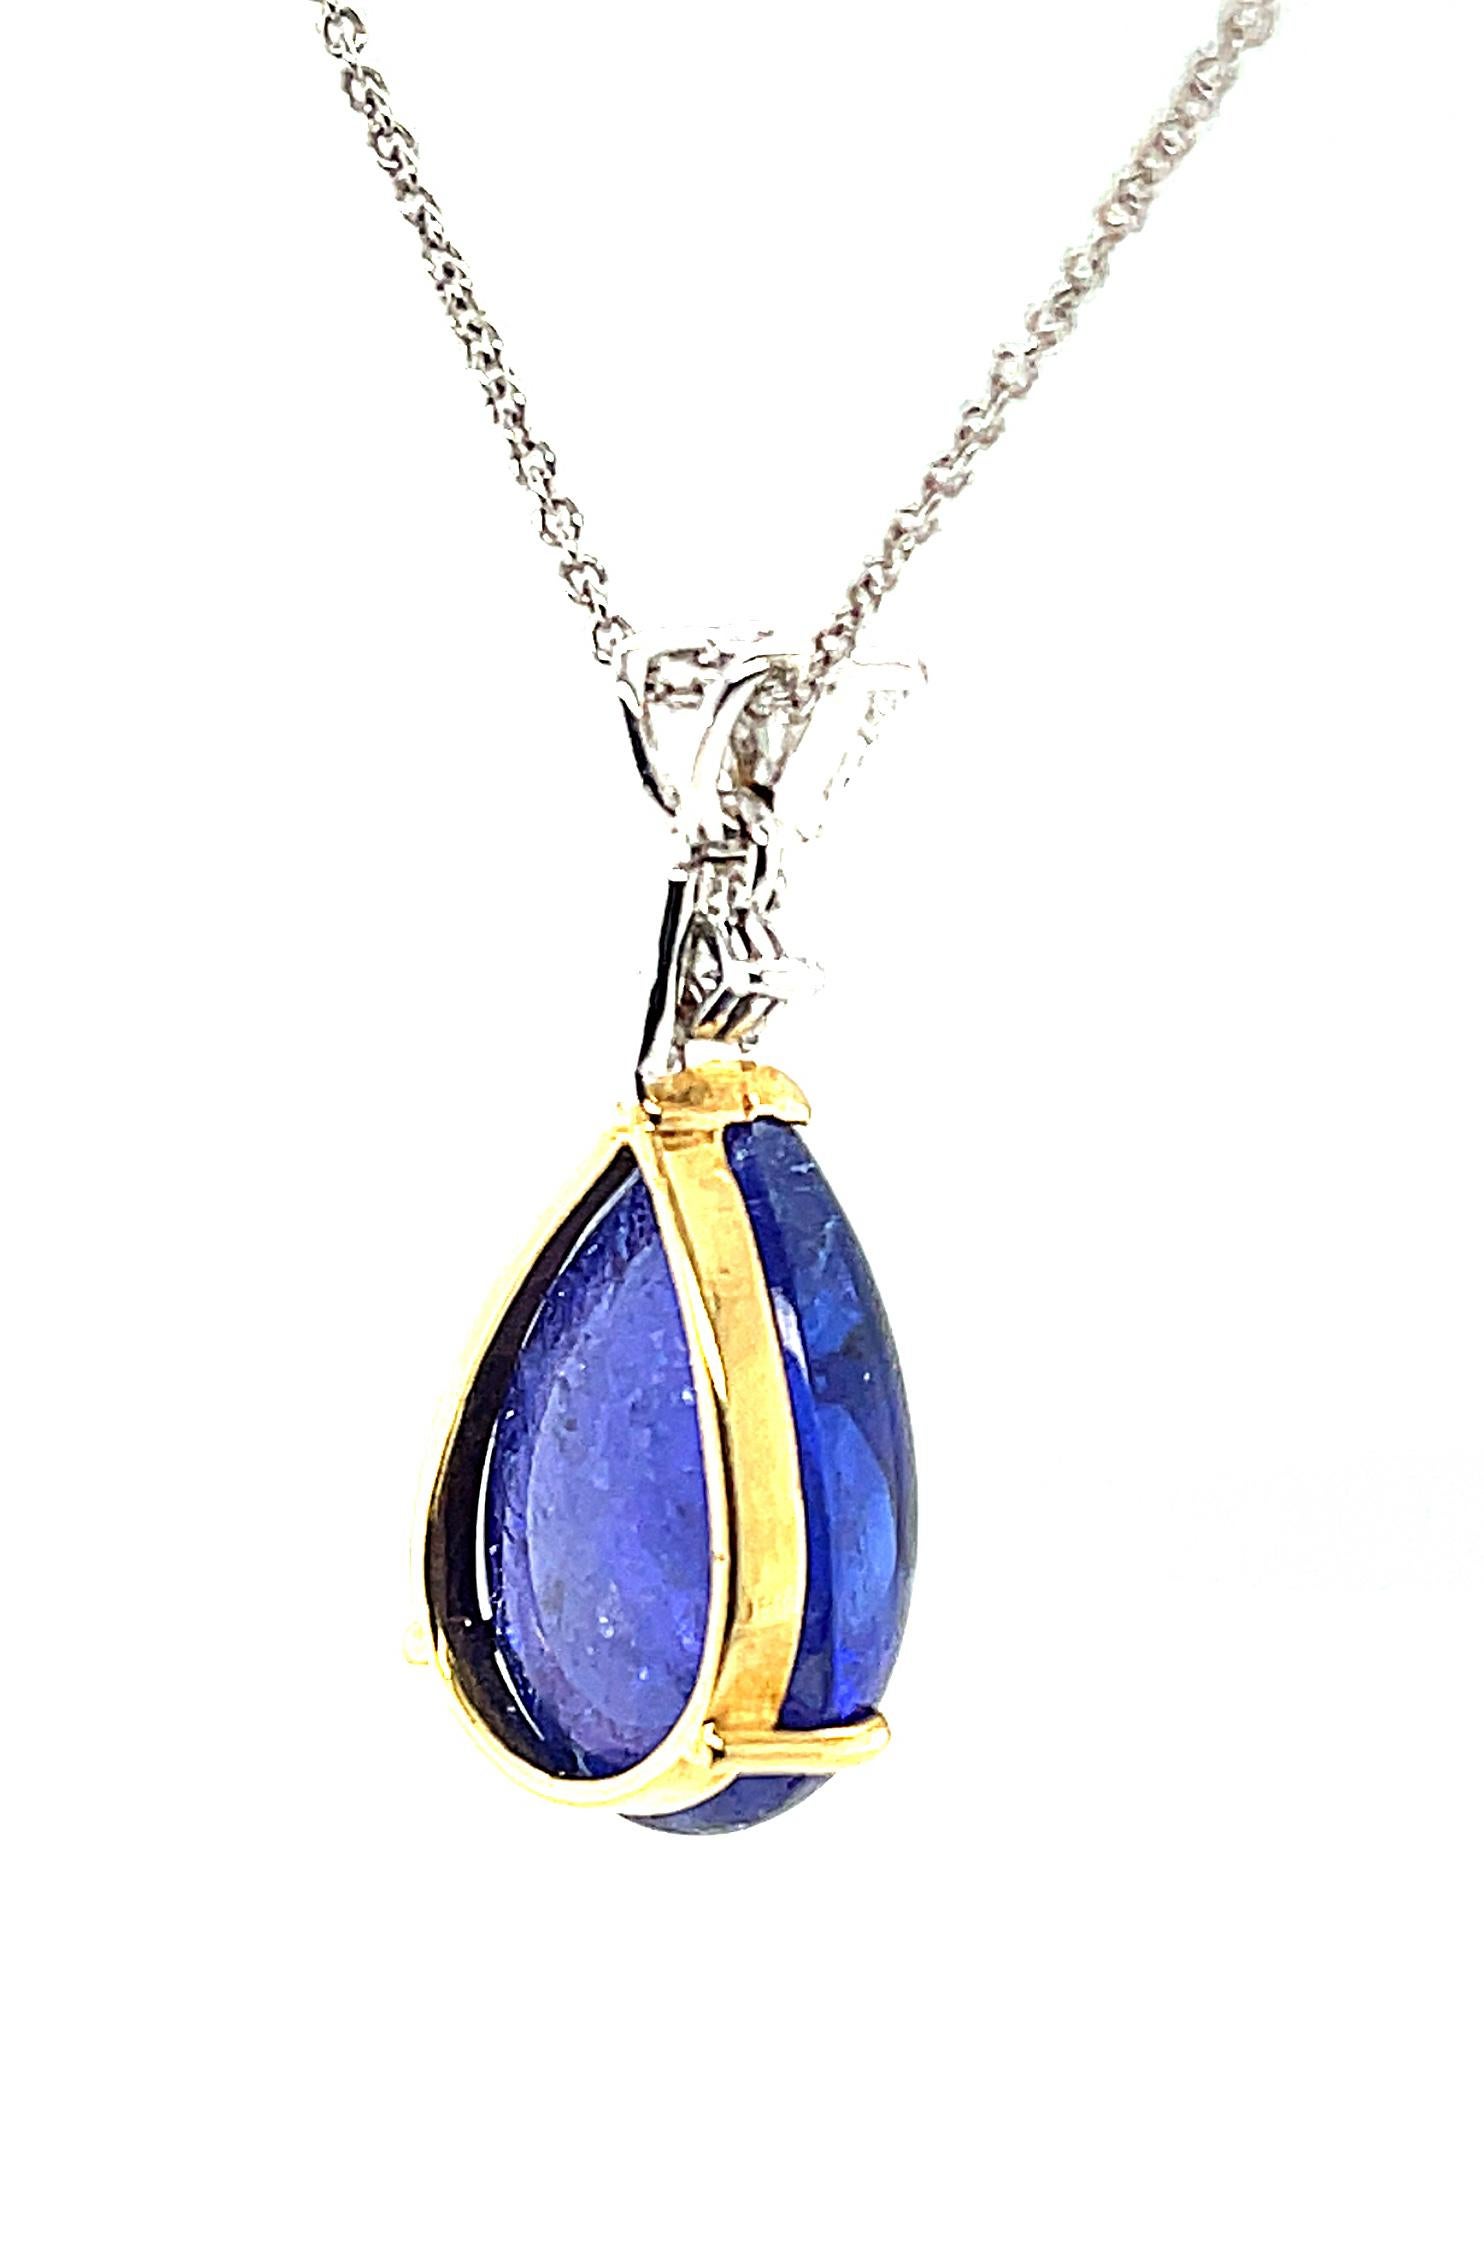 Artisan 12 Carat Tanzanite Cabochon and Diamond Drop Necklace in Yellow and White Gold   For Sale